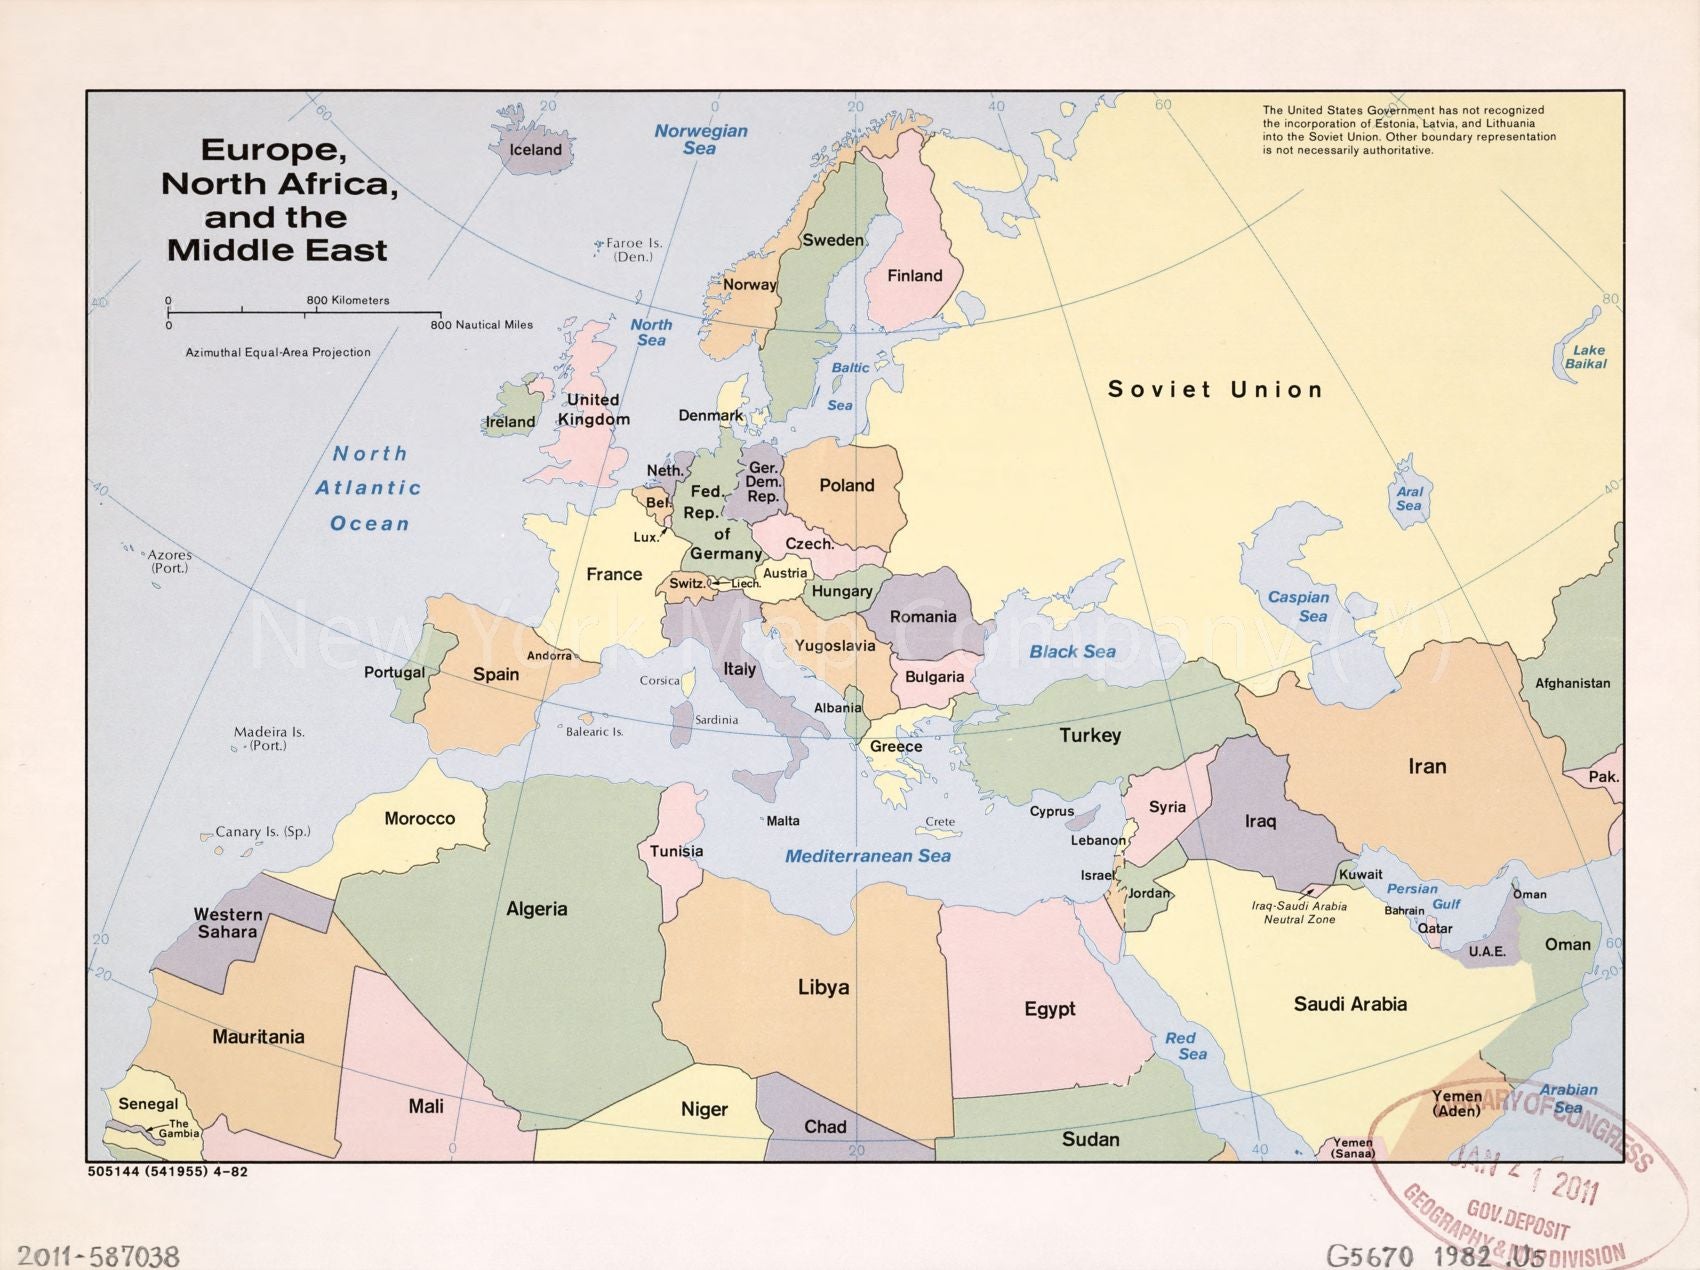 1982 map Europe, North Africa, and the Middle East. Map Subjects: Africa | North | Eastern Hemisphere | Europe | Middle East | Outline Maps